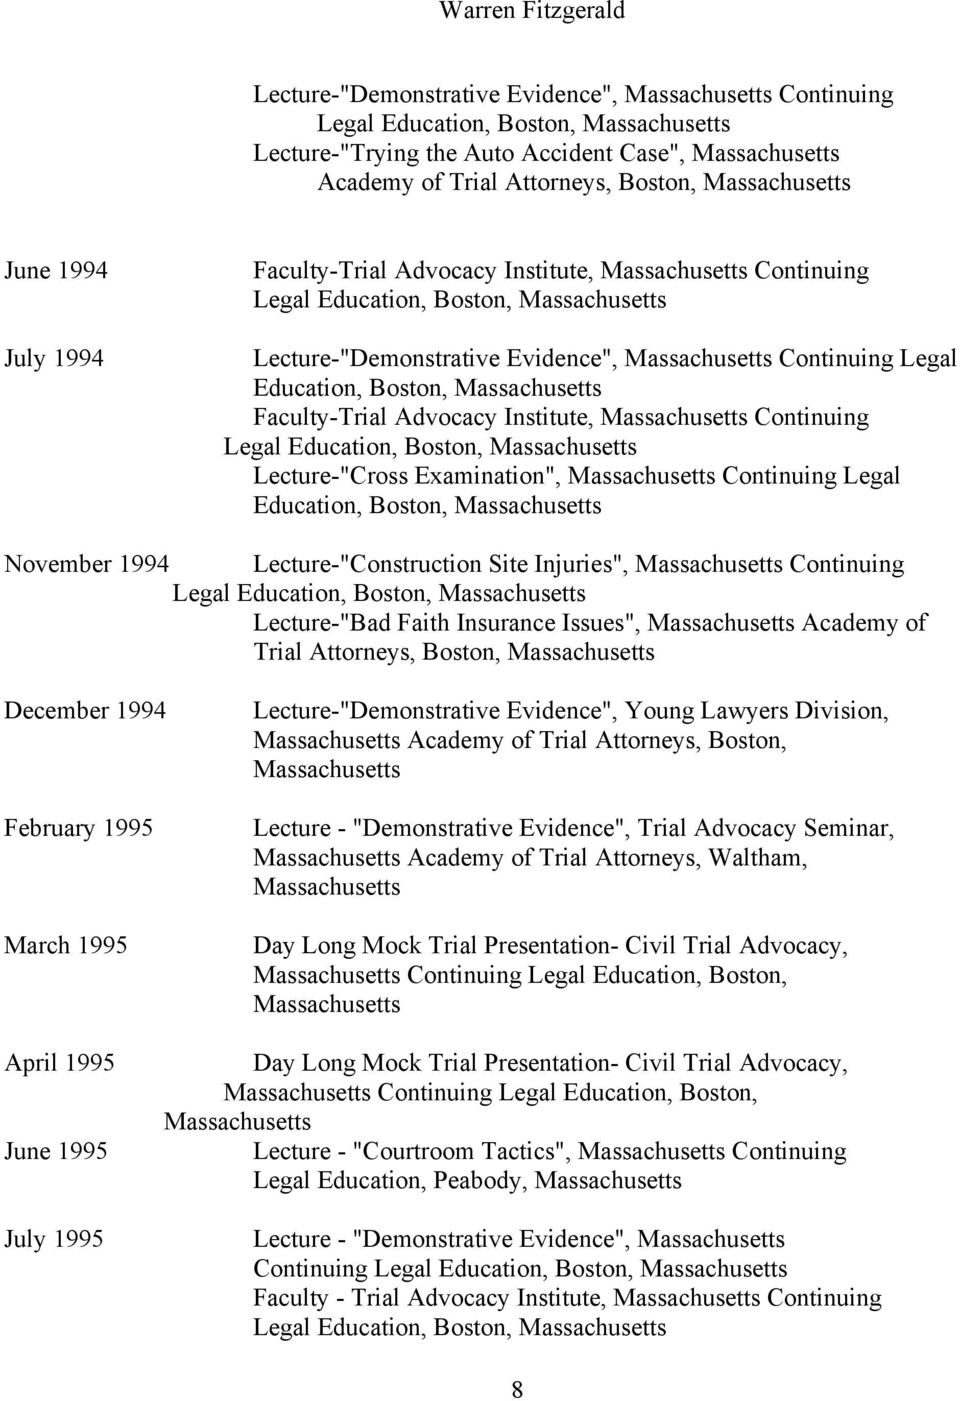 Site Injuries", Continuing Lecture-"Bad Faith Insurance Issues", Academy of Trial Attorneys, December 1994 February 1995 March 1995 Lecture-"Demonstrative Evidence", Young Lawyers Division, Academy